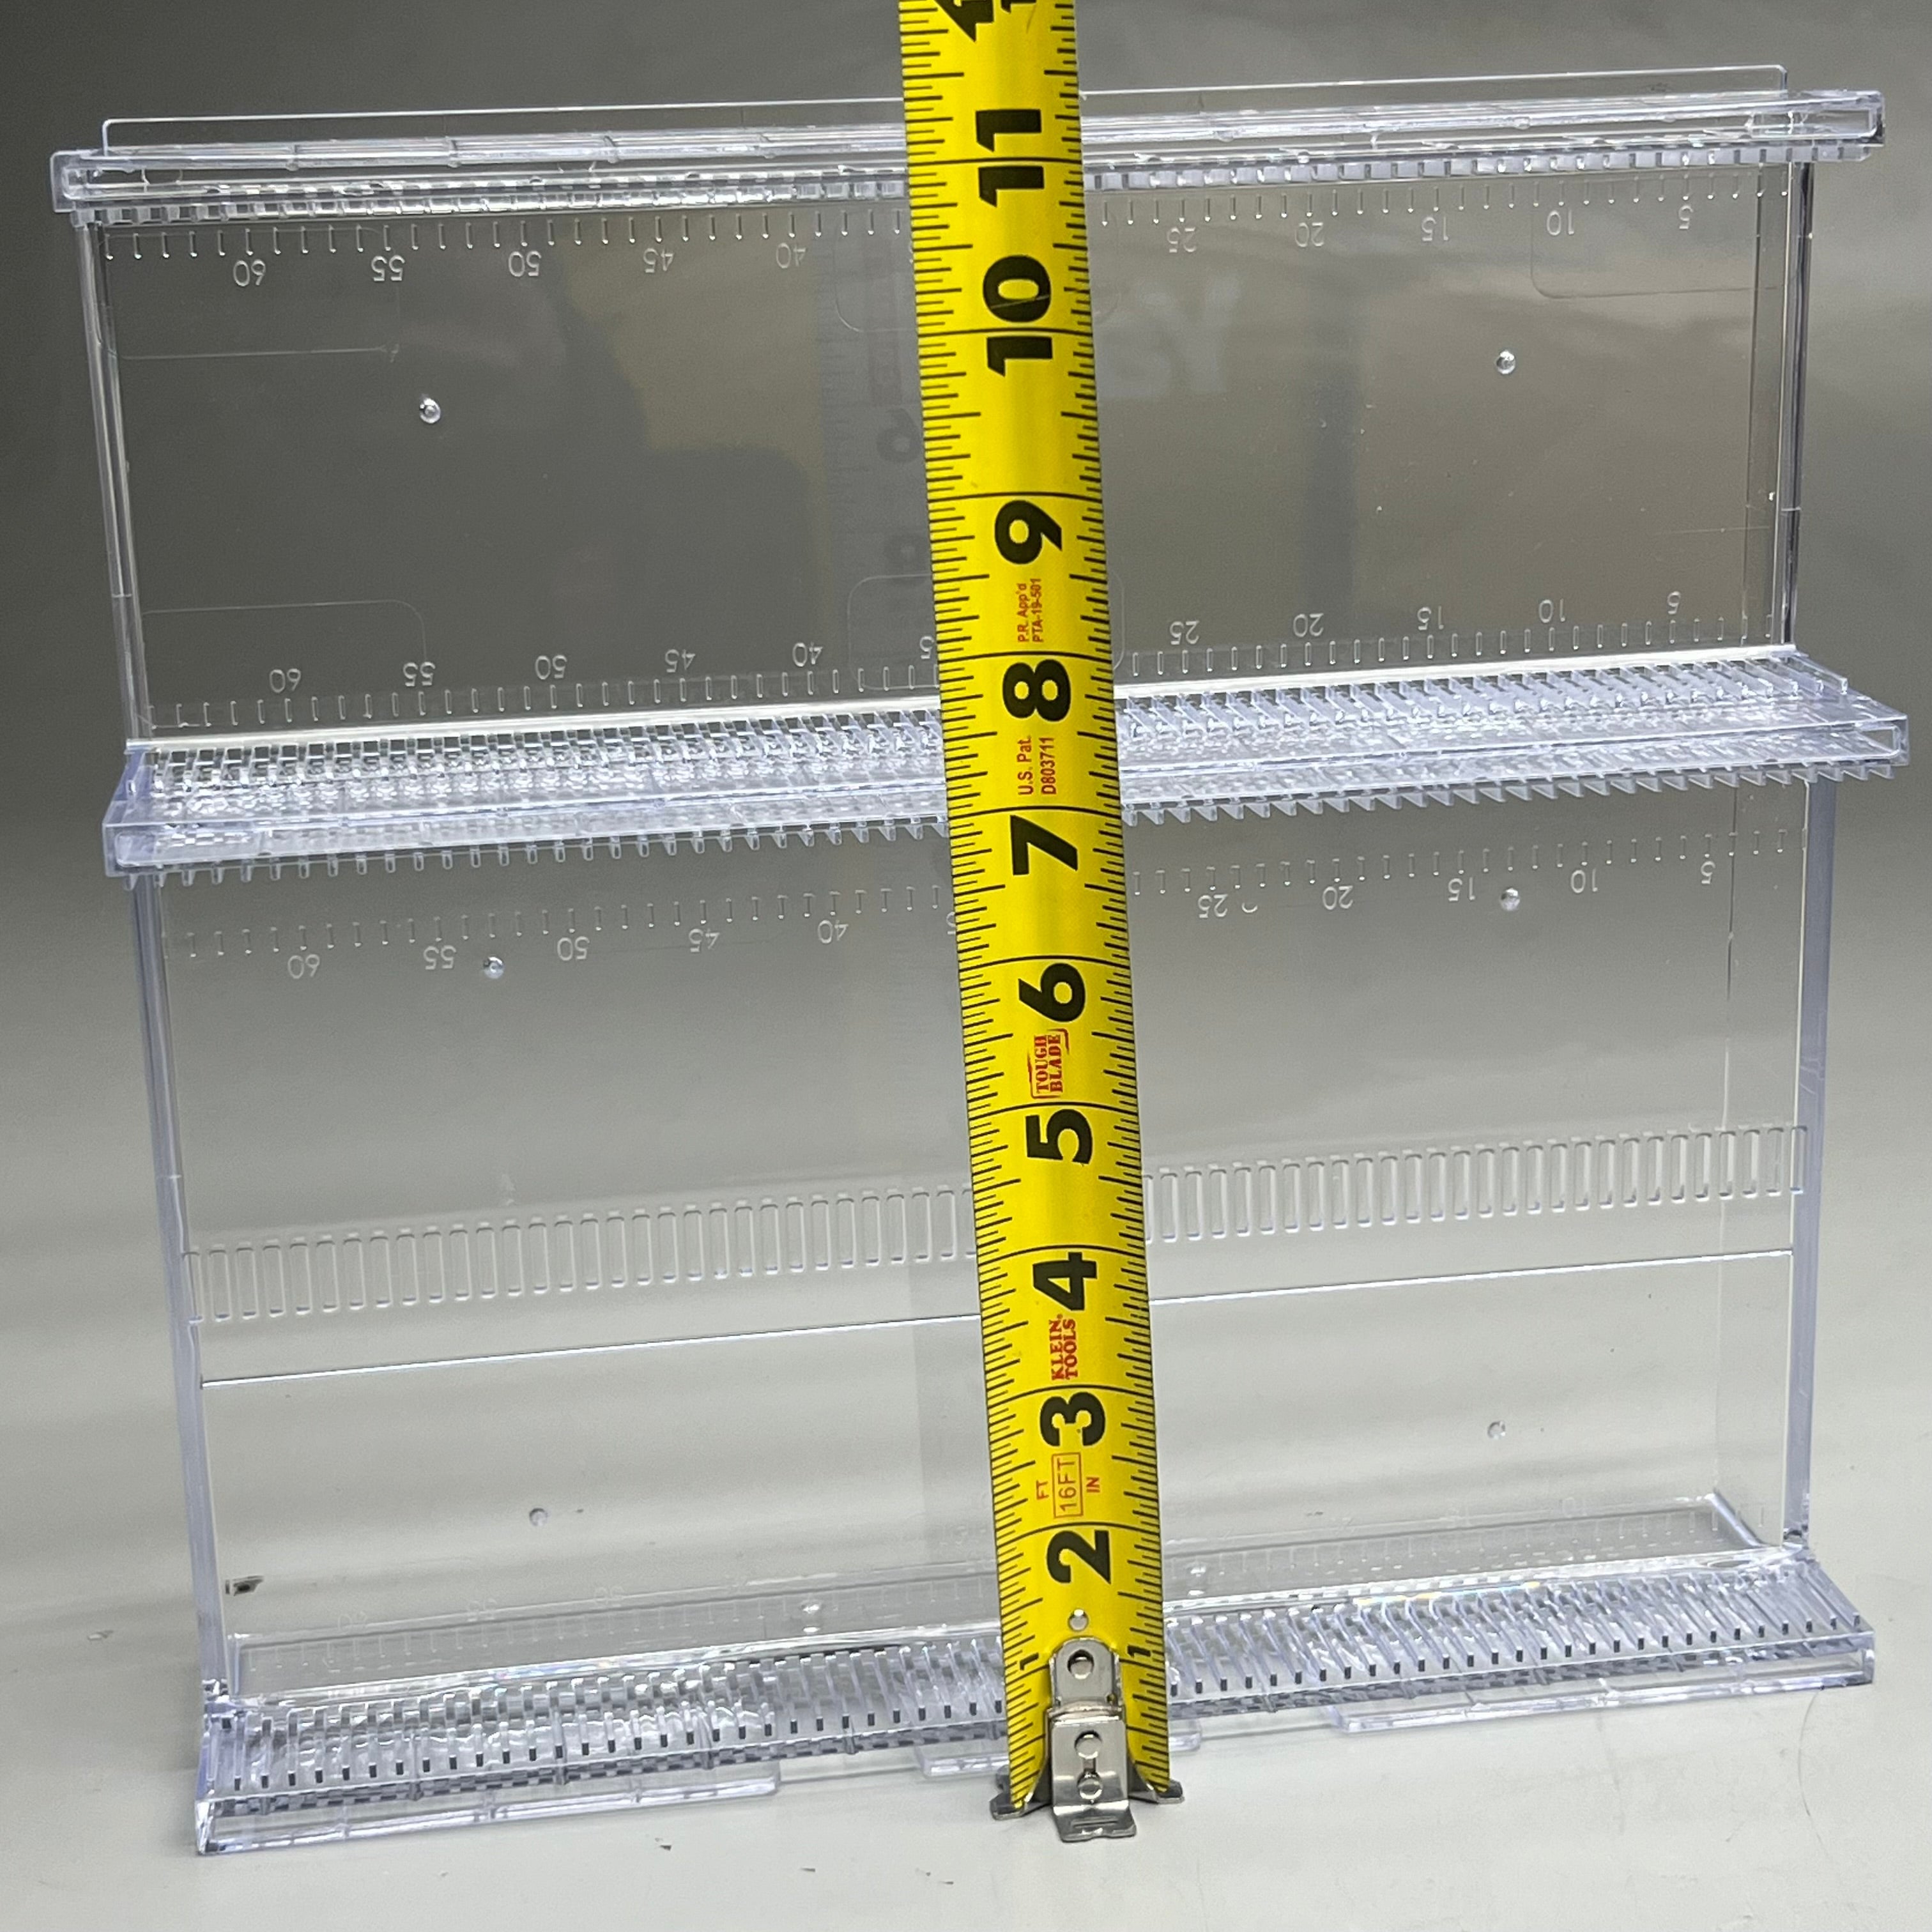 SIFFRON Merchandising Display Ulta Tiered Shelf Containers Clear 15 Pack 7809330930